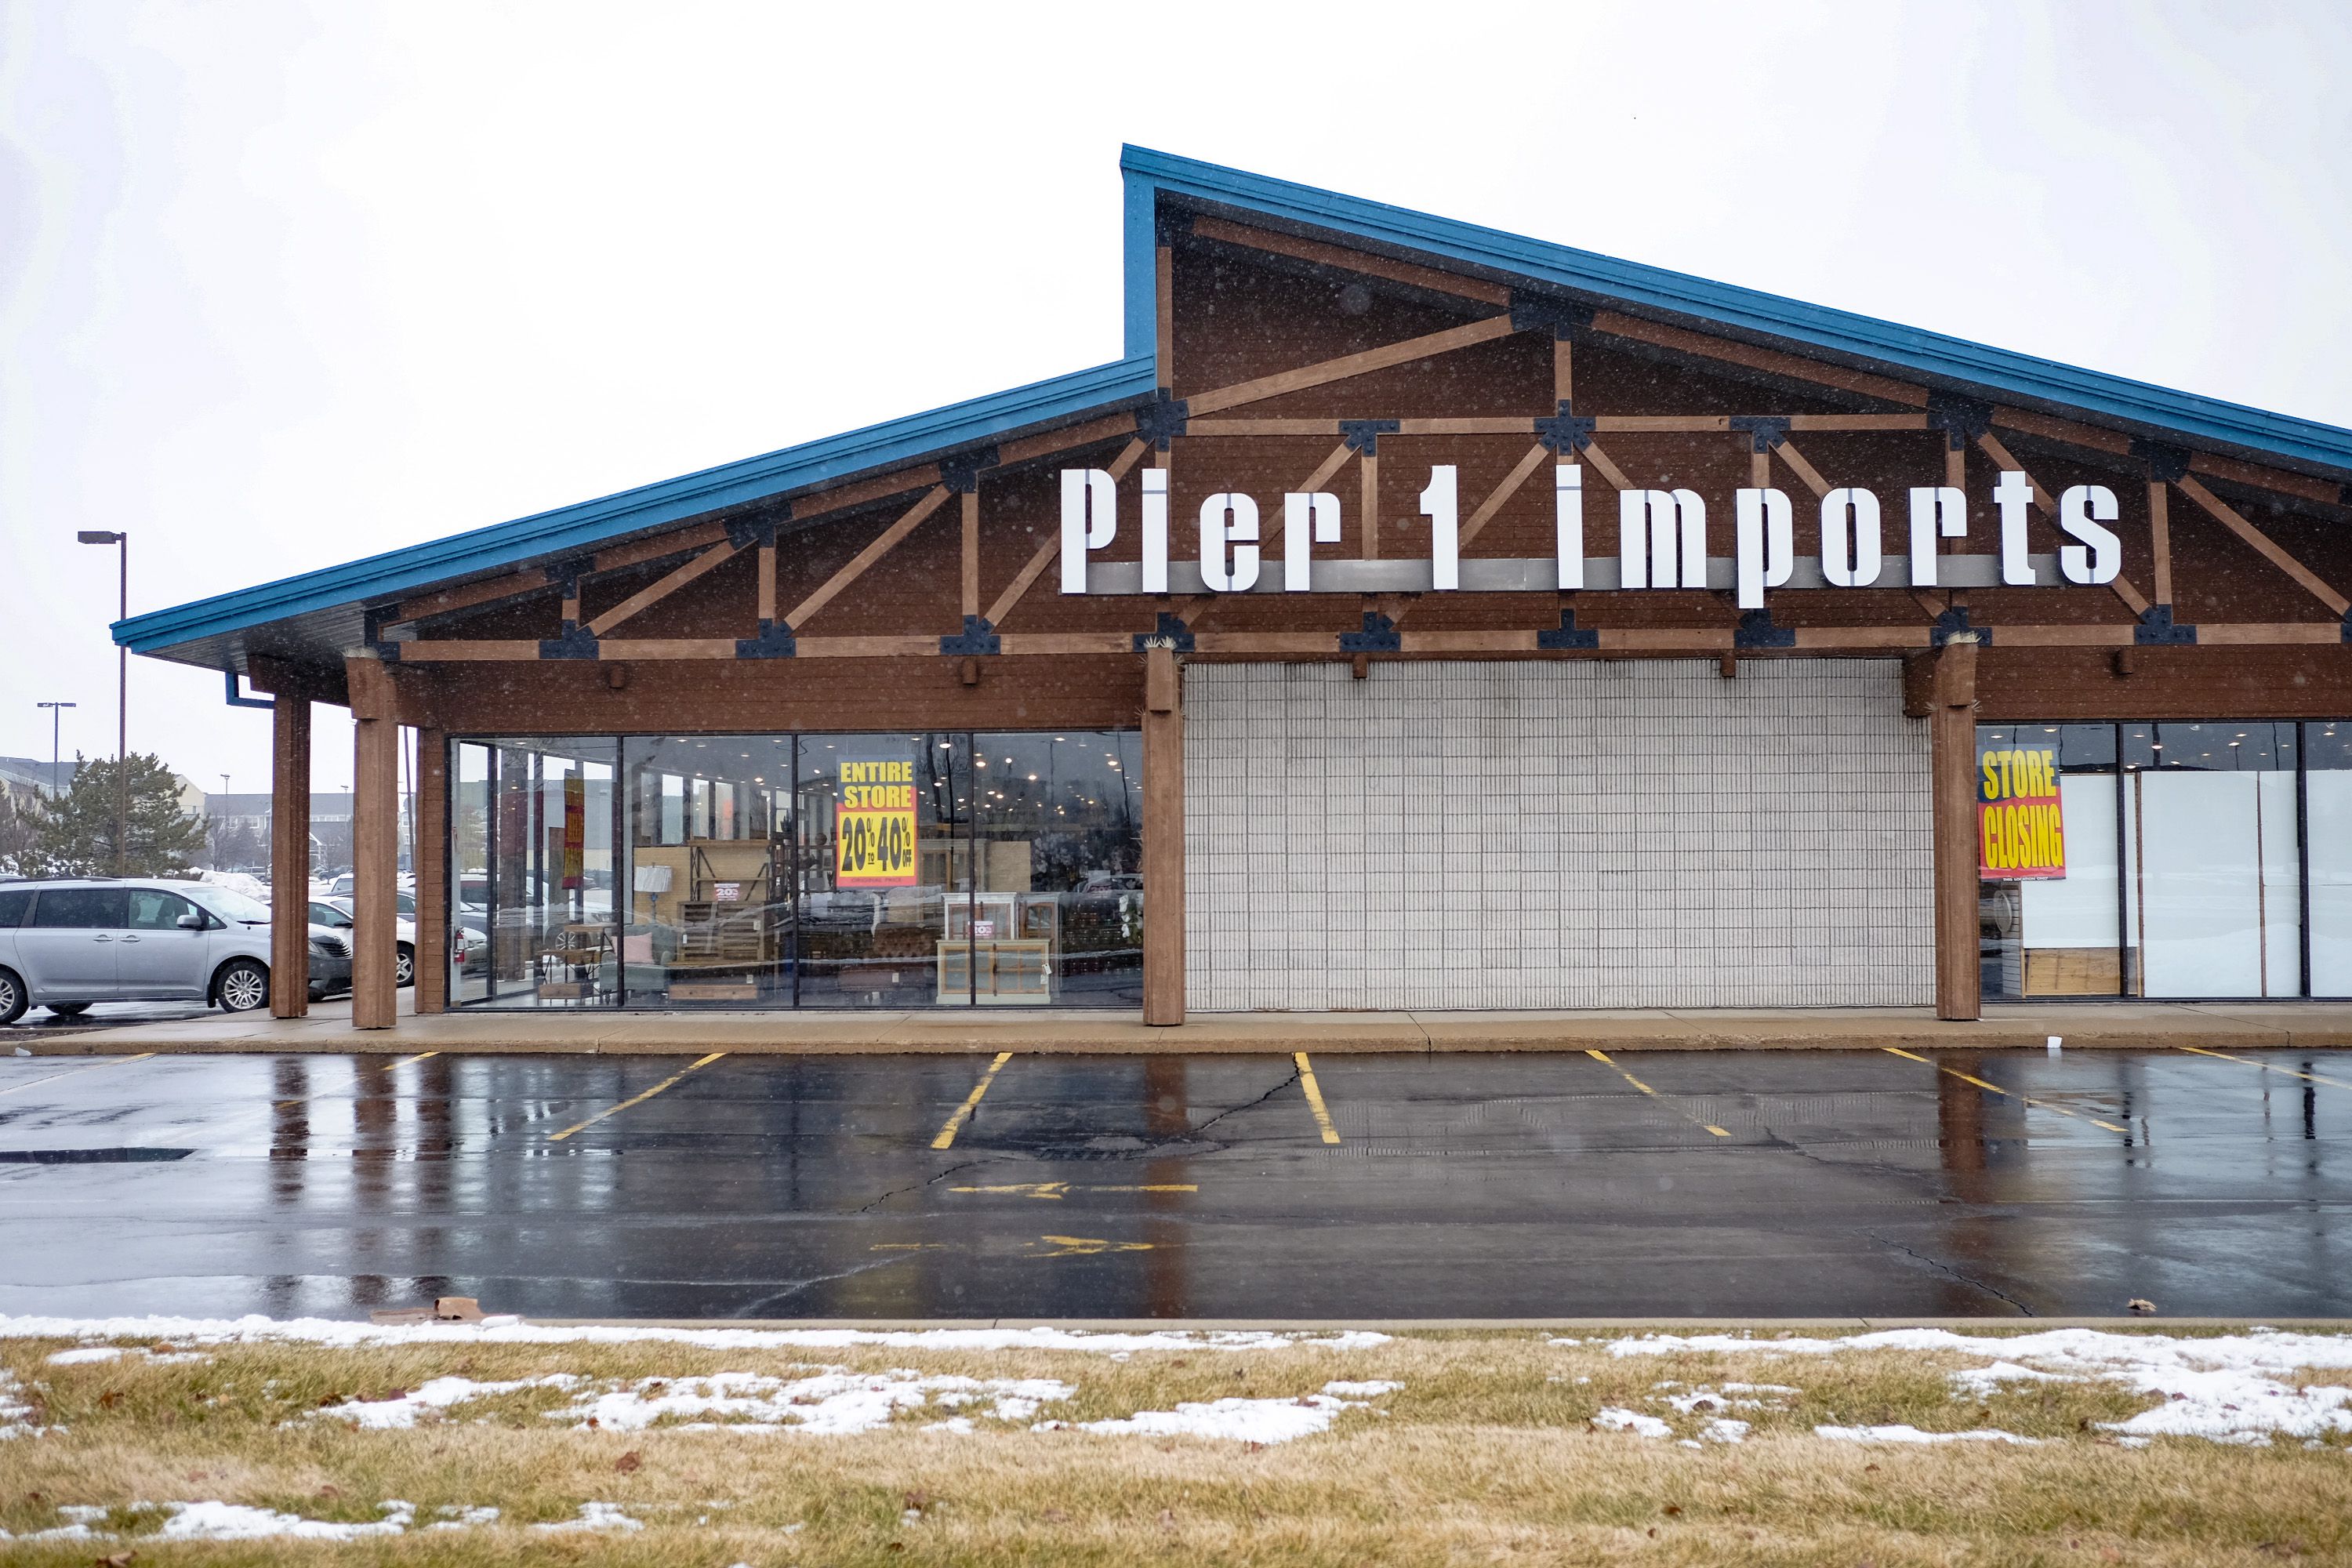 Pier 1 Imports, first opened in 1962, to close all remaining stores 